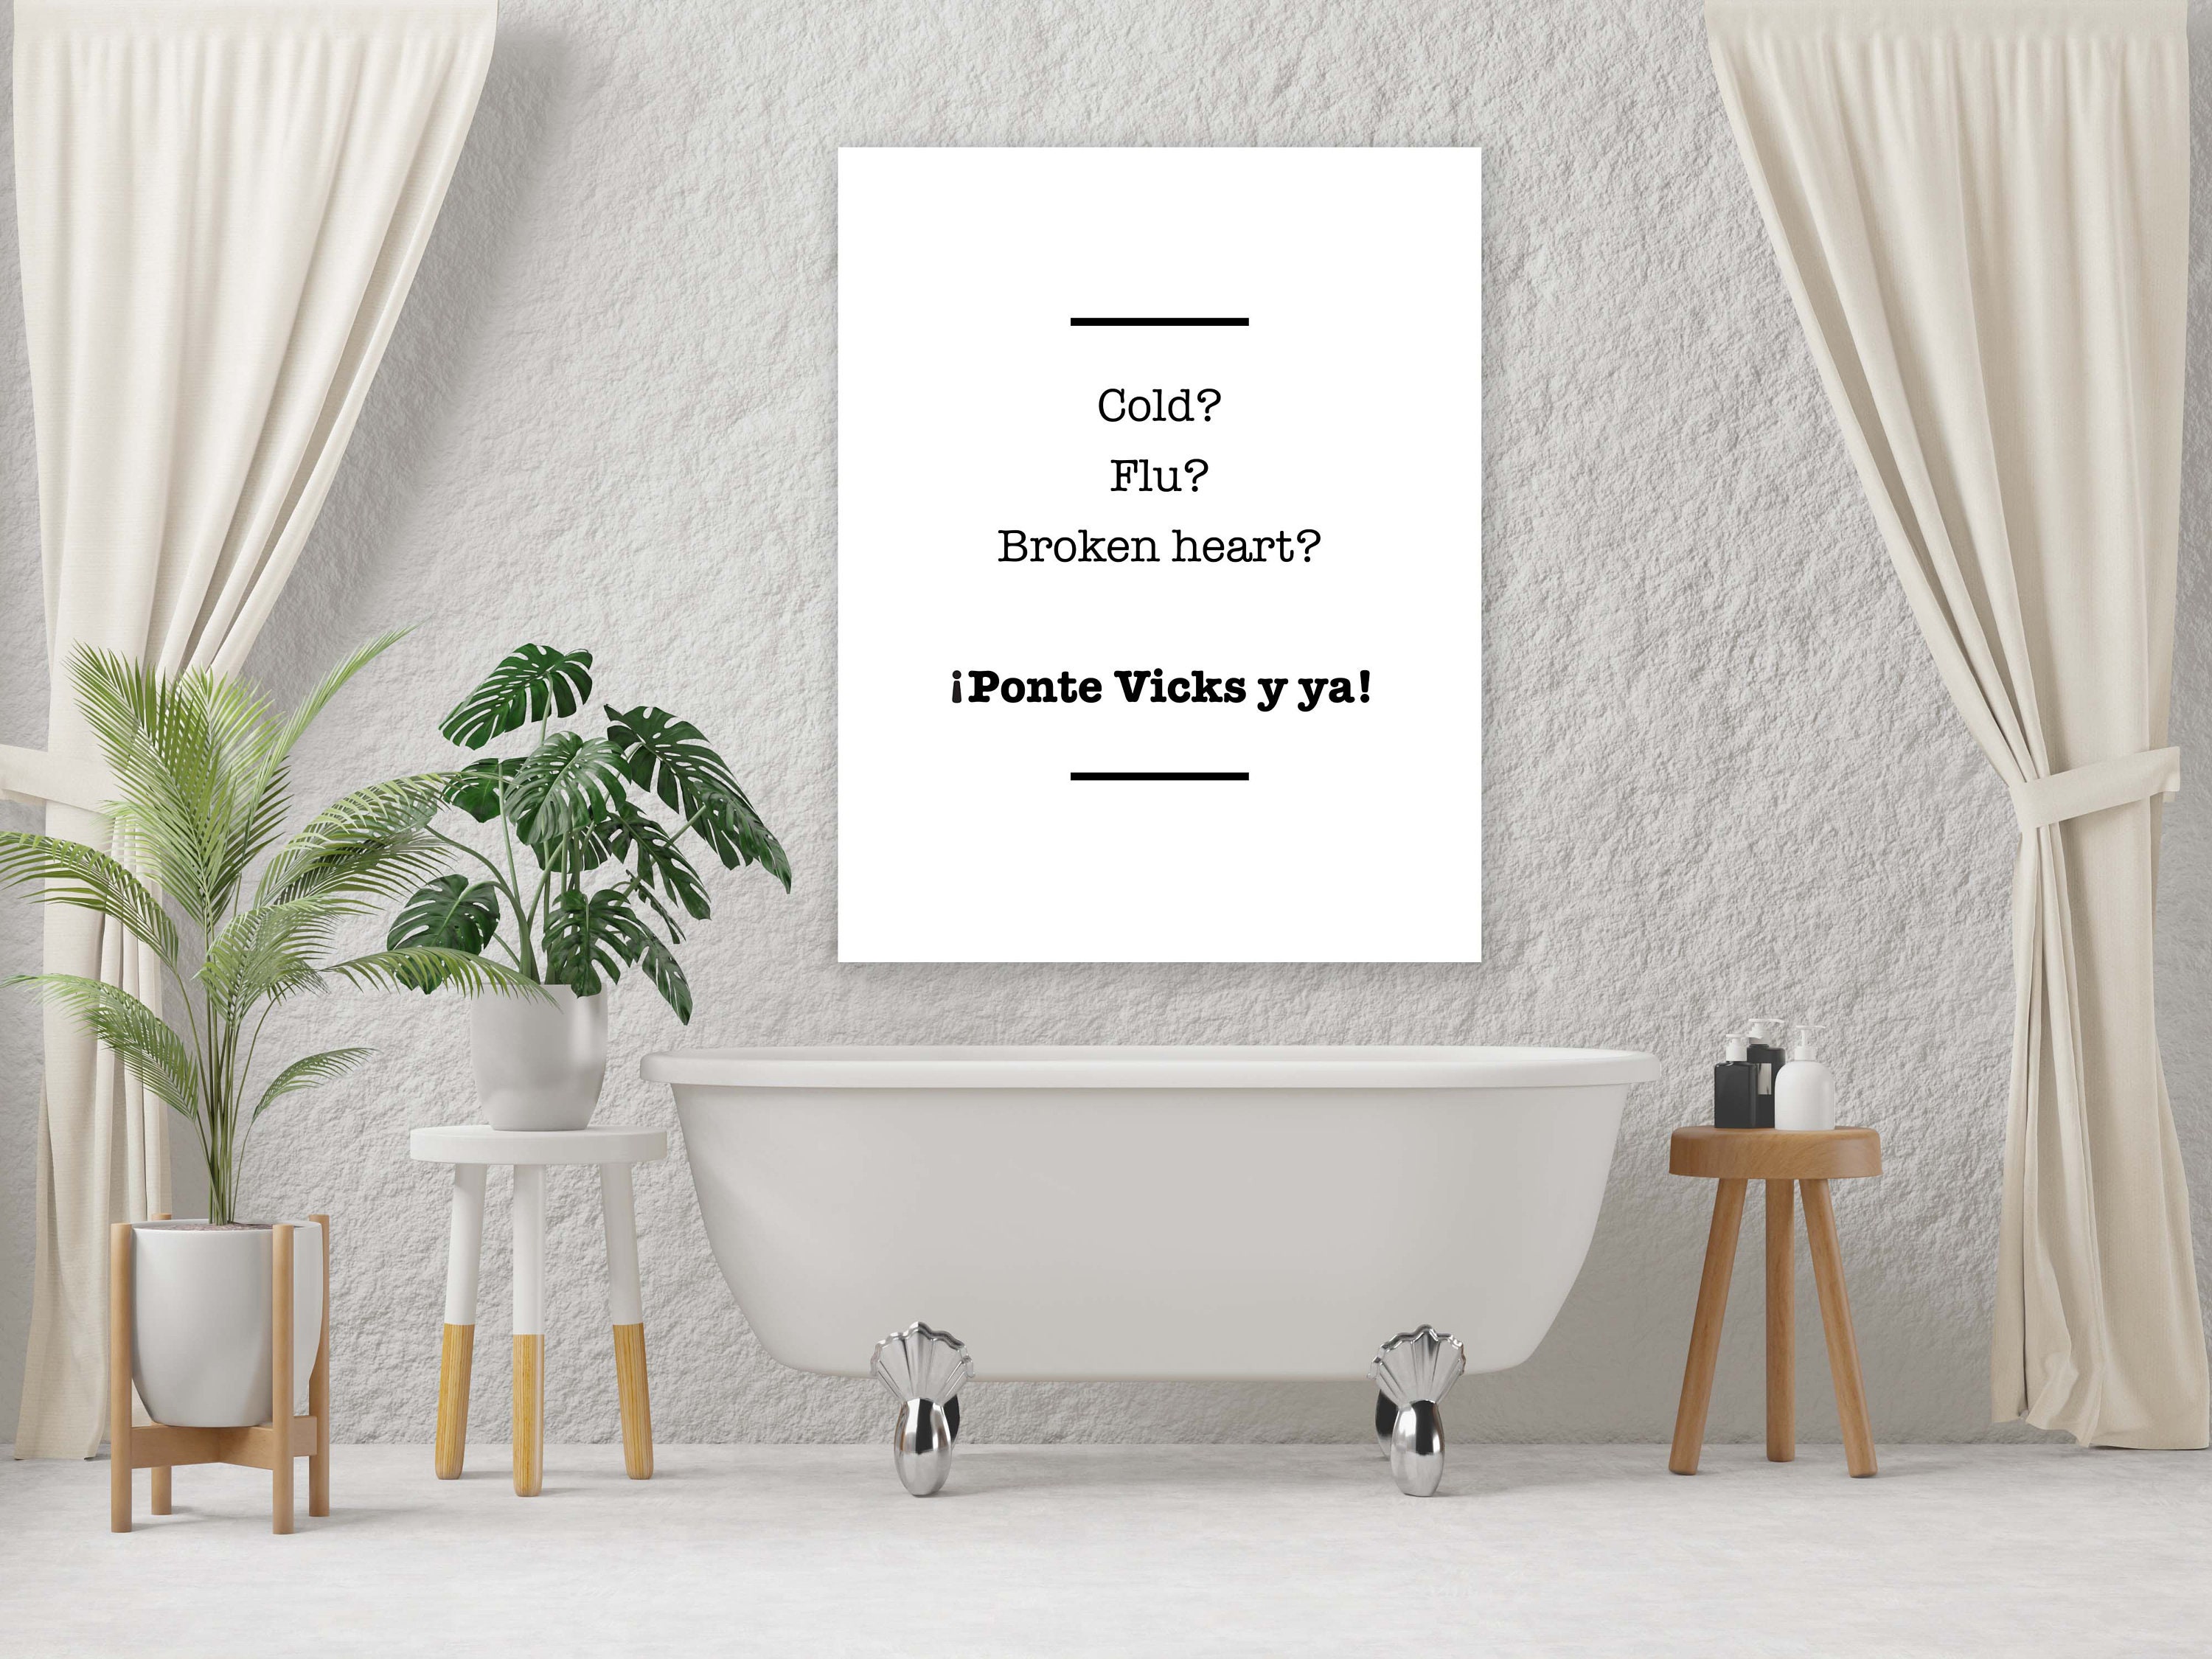  Vinyl Wall Art Decal - Si Lo Crees, Lo Creas/If You Believe,  You Create It - 8 x 25 - Positive Inspiring Spanish Quote Sticker for  Home School Office Coffee Shop